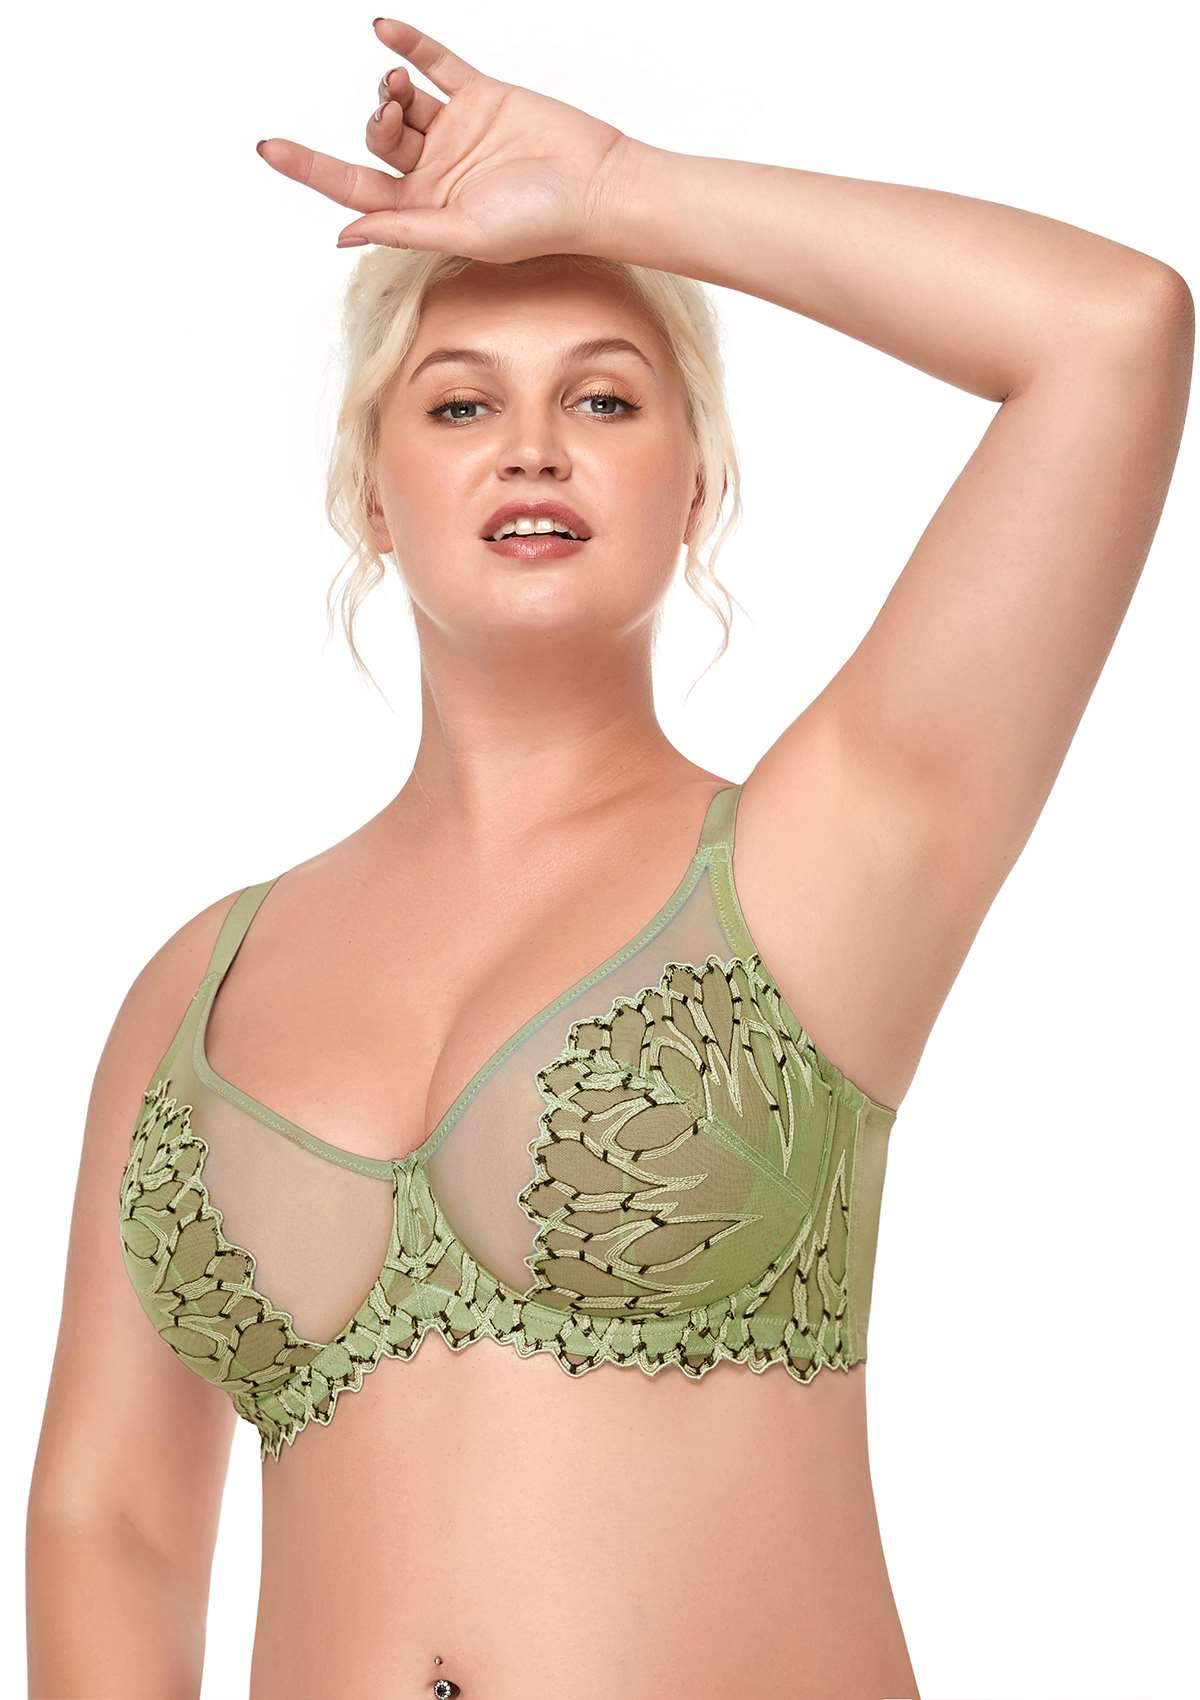 HSIA Chrysanthemum Floral Embroidered Bra: Lace Sheer Unpadded Bra - Green / 36 / DD/E